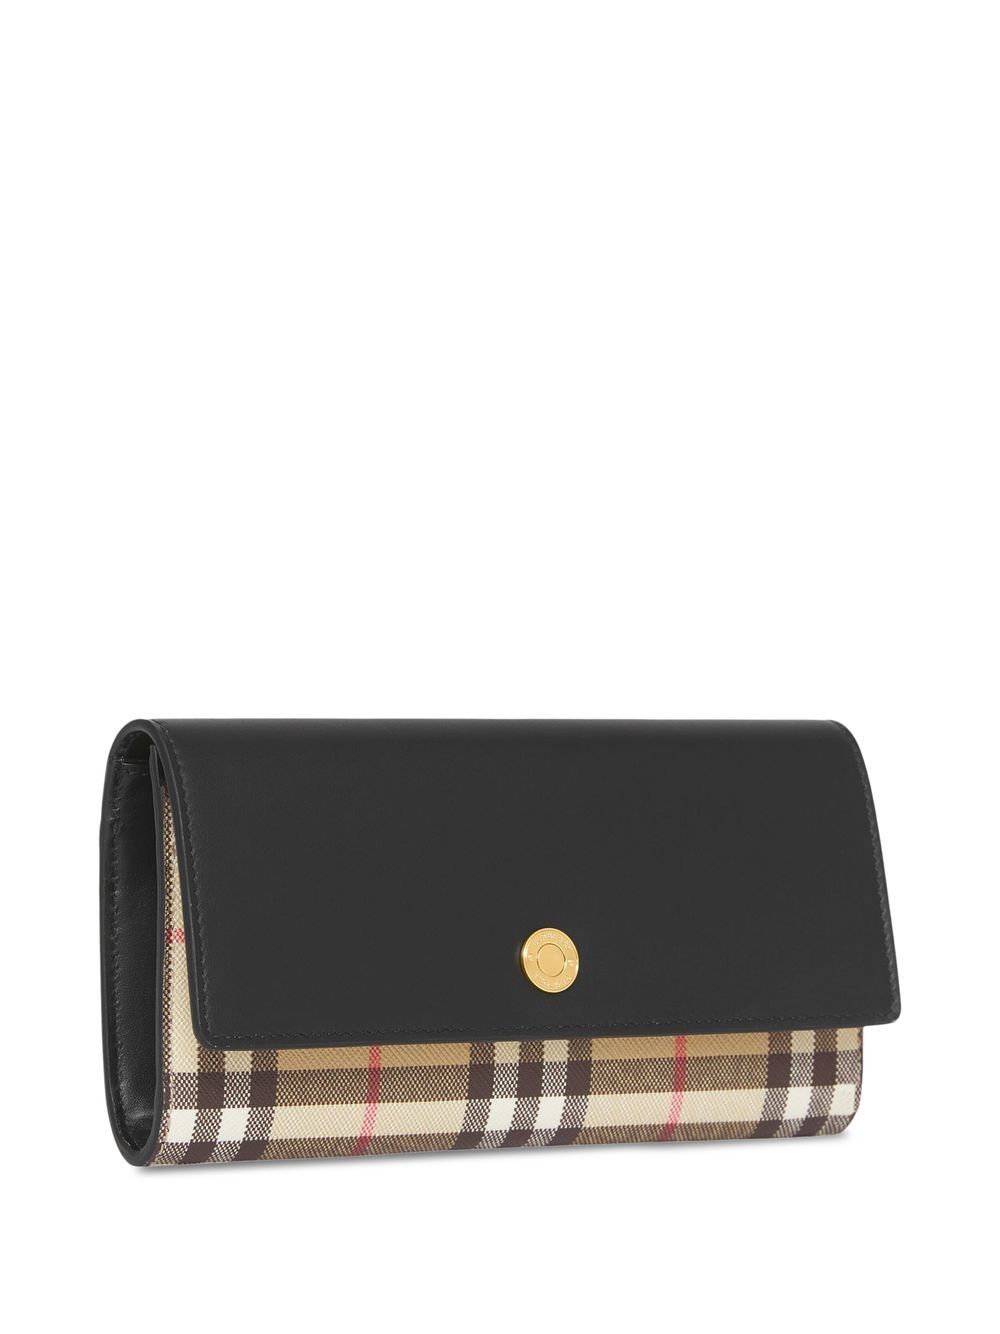 Burberry Burberry FLORAL CHECK PRINT LEATHER Card holder - Stylemyle